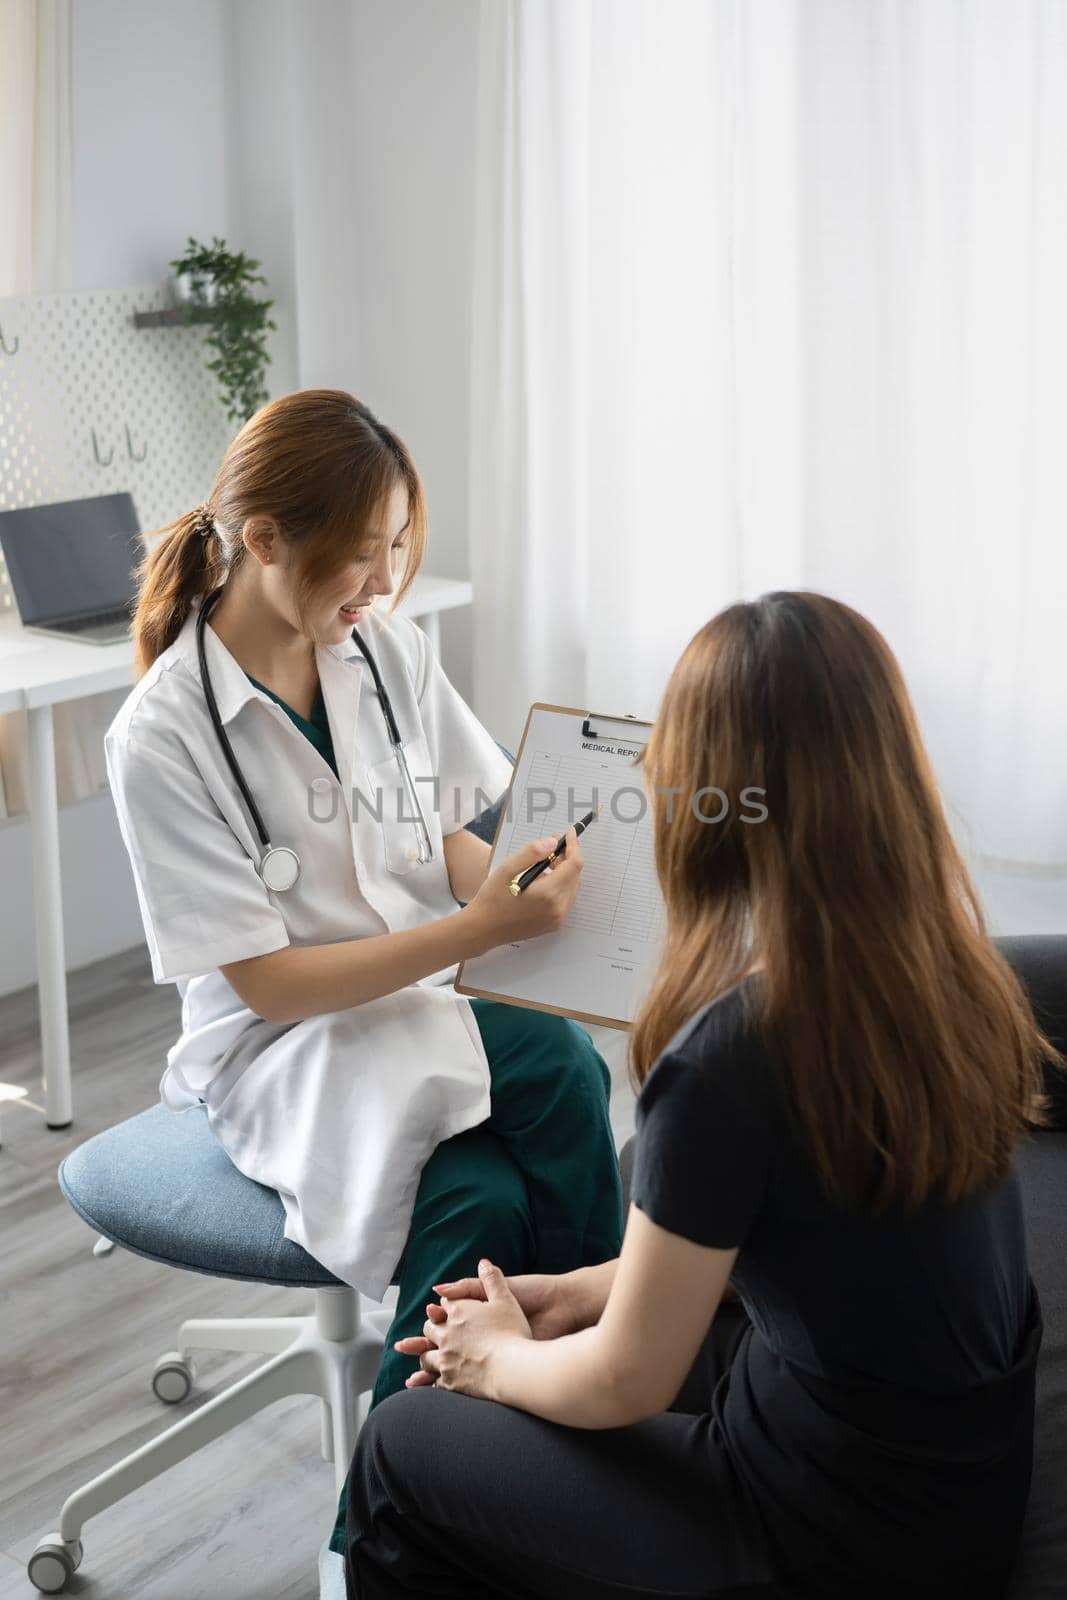 Female doctor explaining diagnosis to her patient. Healthcare and medical concept.